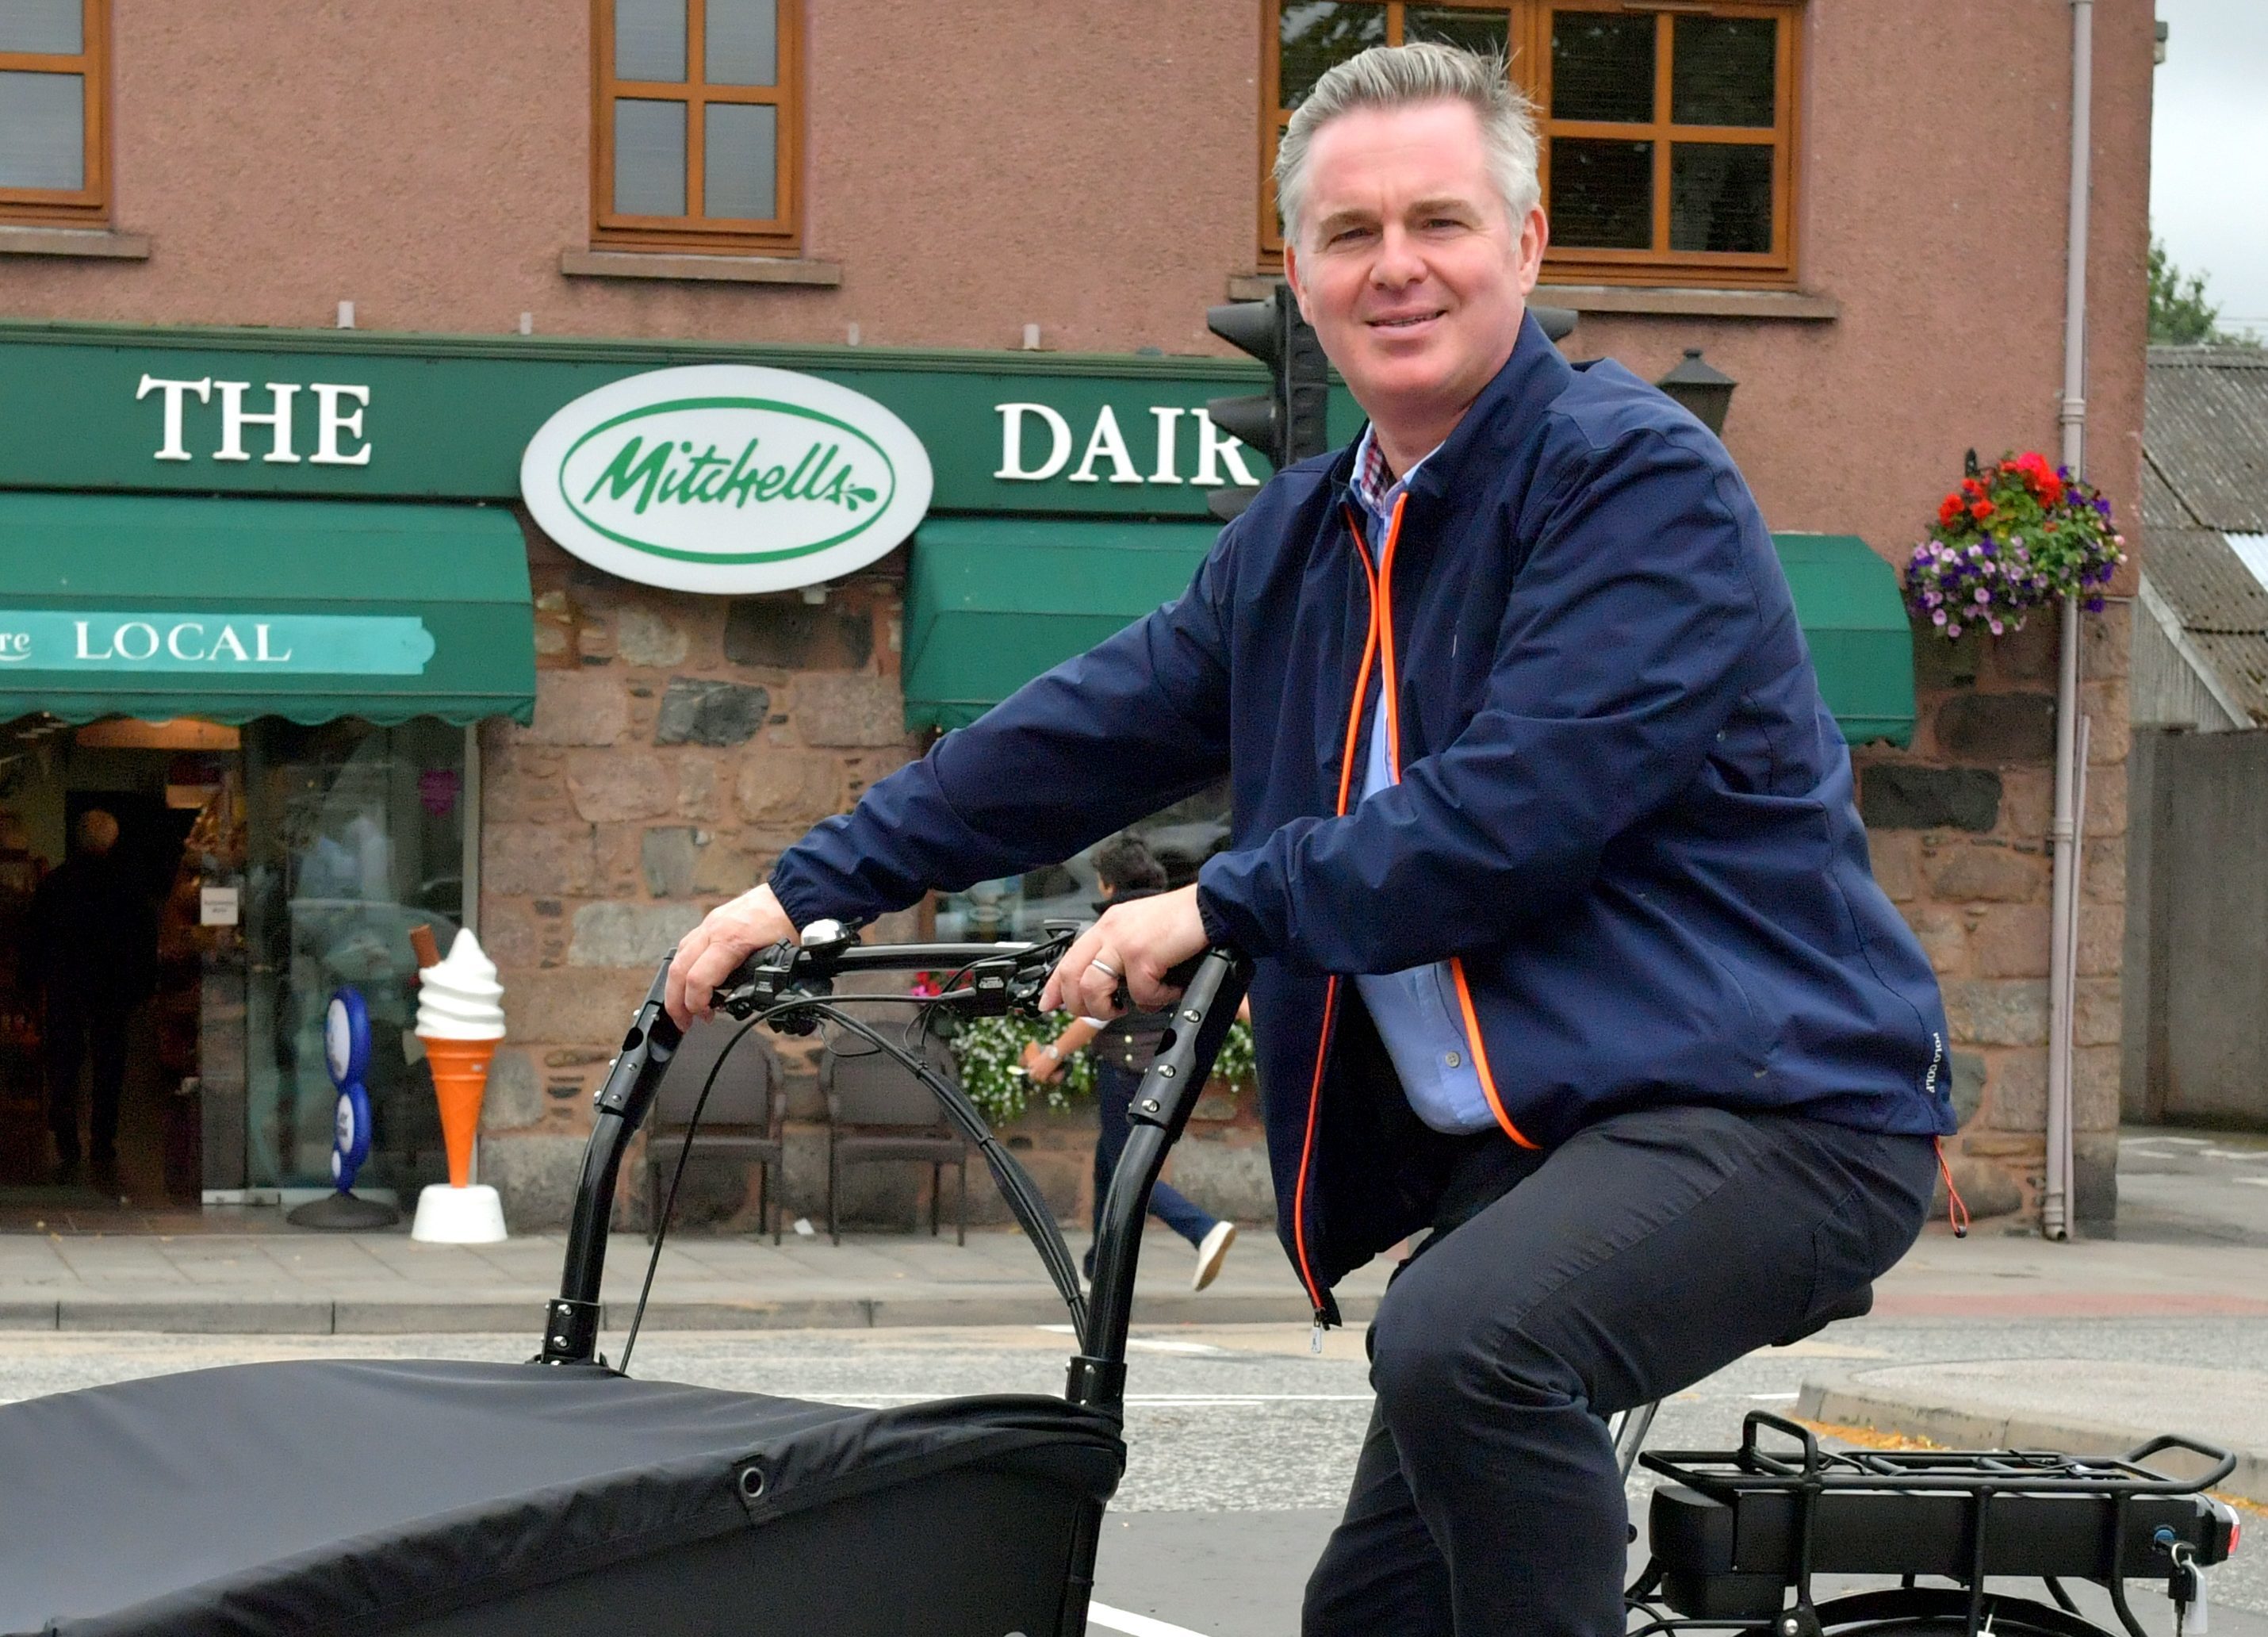 Mitchells Dairy, Inverurie have obtained an electric bike to make local deliveries from the shop, as part of a council initiative.    
Pictured - Colin Clark MP tries out the new electric delivery bike.    
Picture and video by Kami Thomson